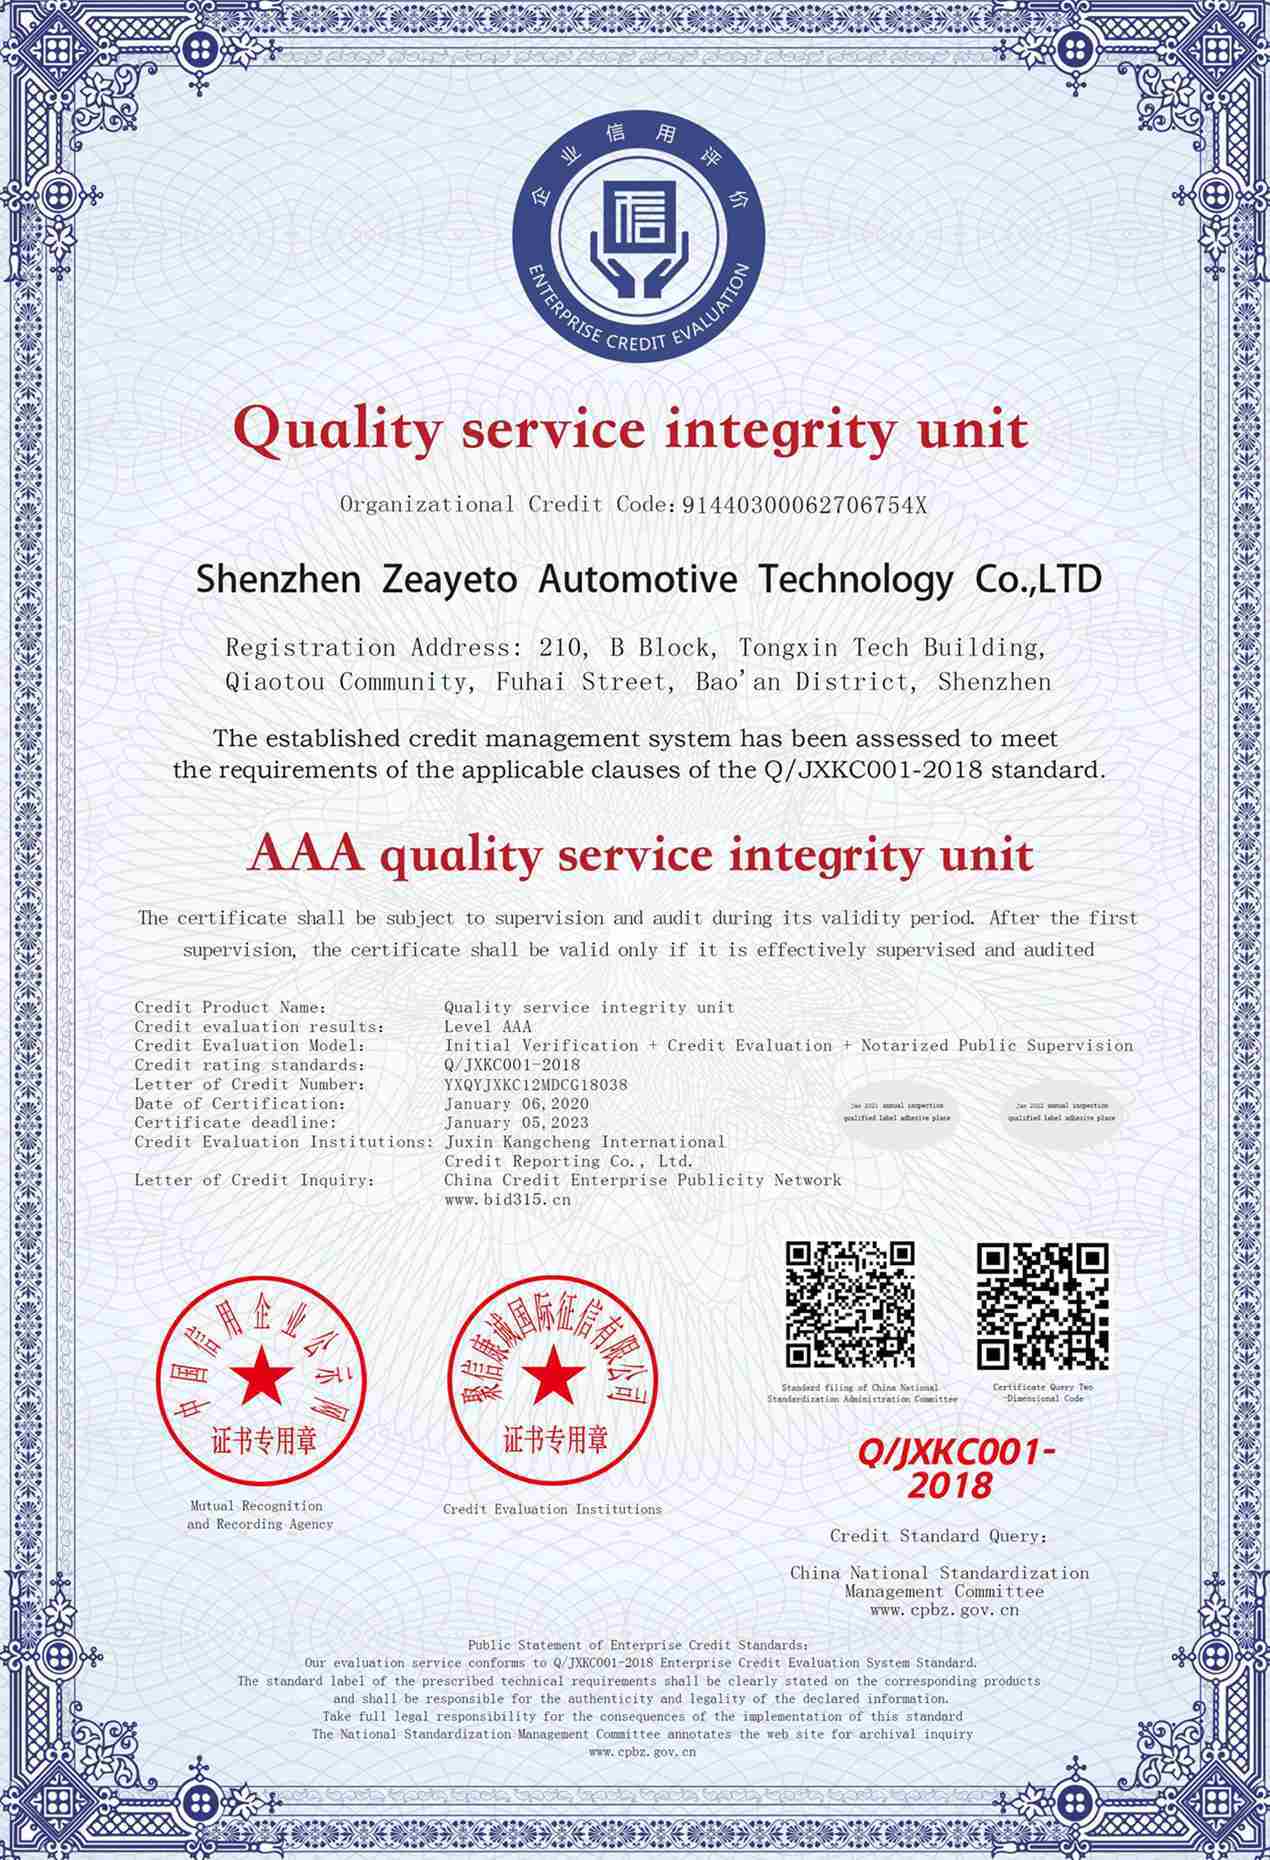 AAA Quality Service Integrity Unit